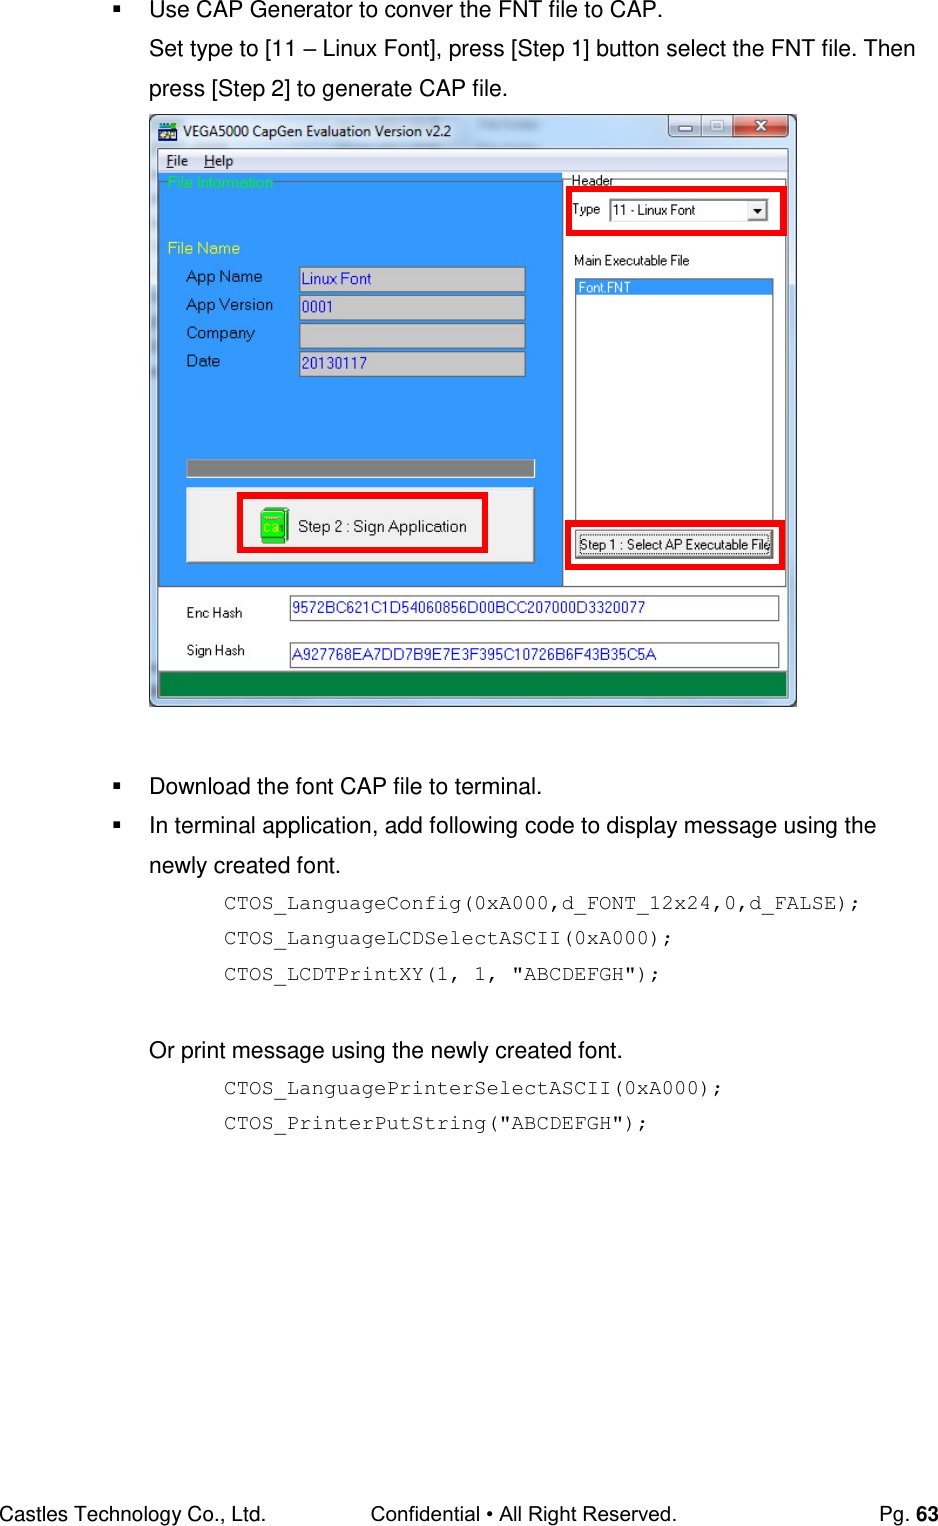 Castles Technology Co., Ltd. Confidential • All Right Reserved.  Pg. 63   Use CAP Generator to conver the FNT file to CAP.  Set type to [11 – Linux Font], press [Step 1] button select the FNT file. Then press [Step 2] to generate CAP file.     Download the font CAP file to terminal.   In terminal application, add following code to display message using the newly created font. CTOS_LanguageConfig(0xA000,d_FONT_12x24,0,d_FALSE); CTOS_LanguageLCDSelectASCII(0xA000); CTOS_LCDTPrintXY(1, 1, &quot;ABCDEFGH&quot;);  Or print message using the newly created font. CTOS_LanguagePrinterSelectASCII(0xA000); CTOS_PrinterPutString(&quot;ABCDEFGH&quot;);      